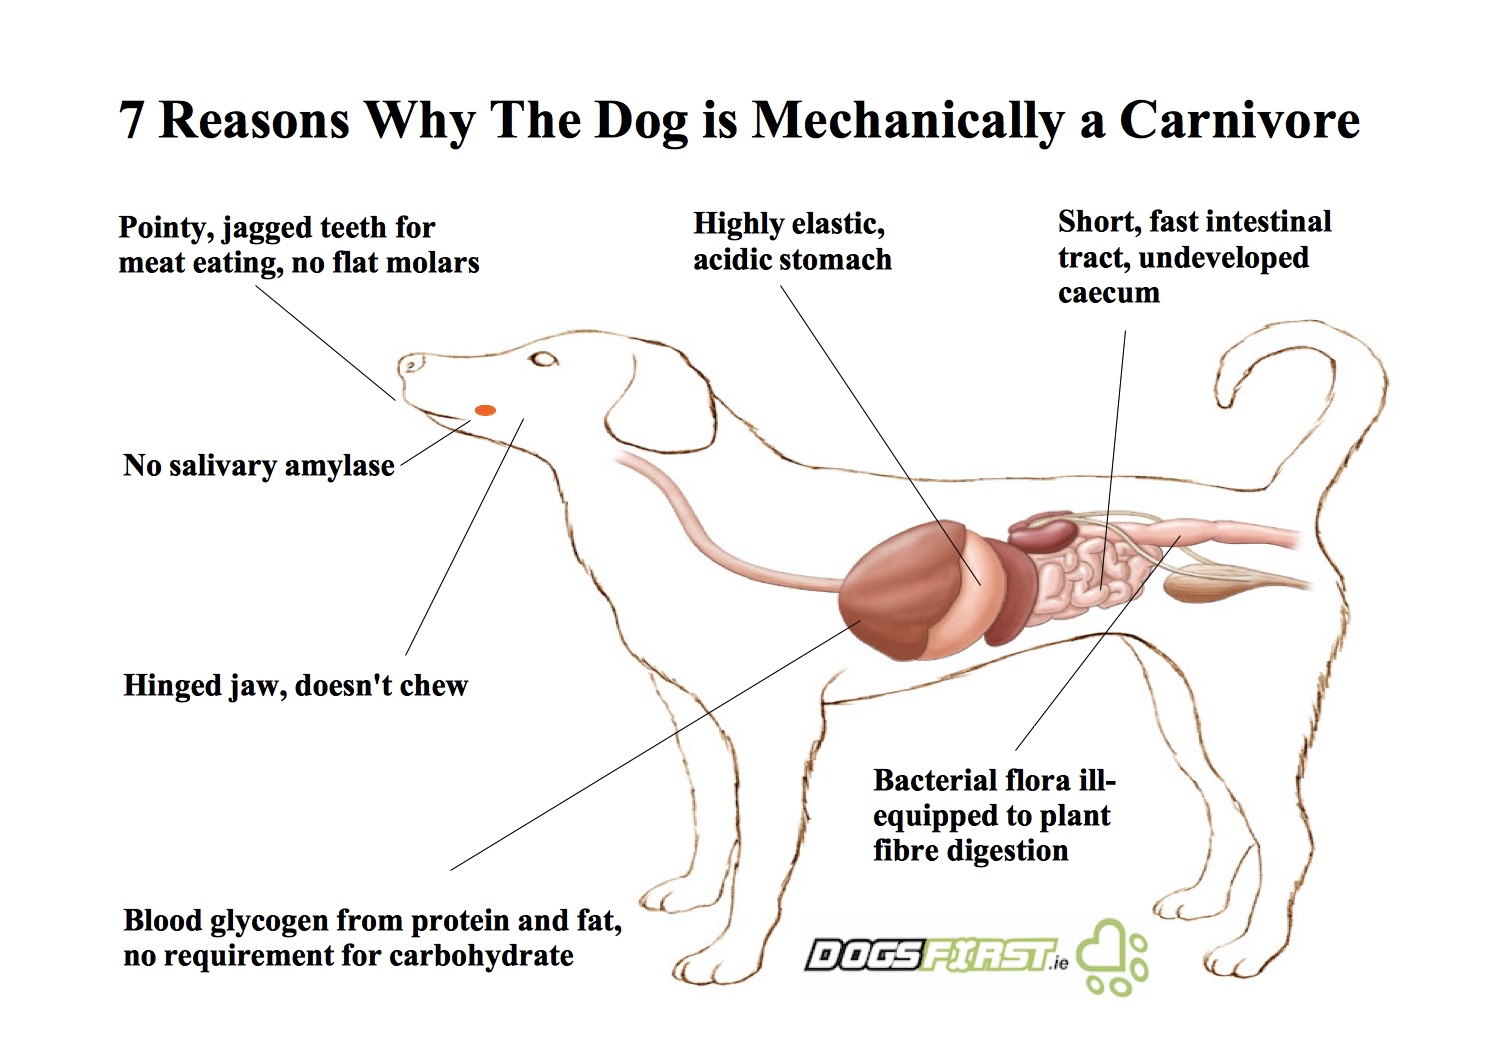 A diagram showing 7 Reasons Why the dog is Mechanically a Carnivore and needs raw dog food